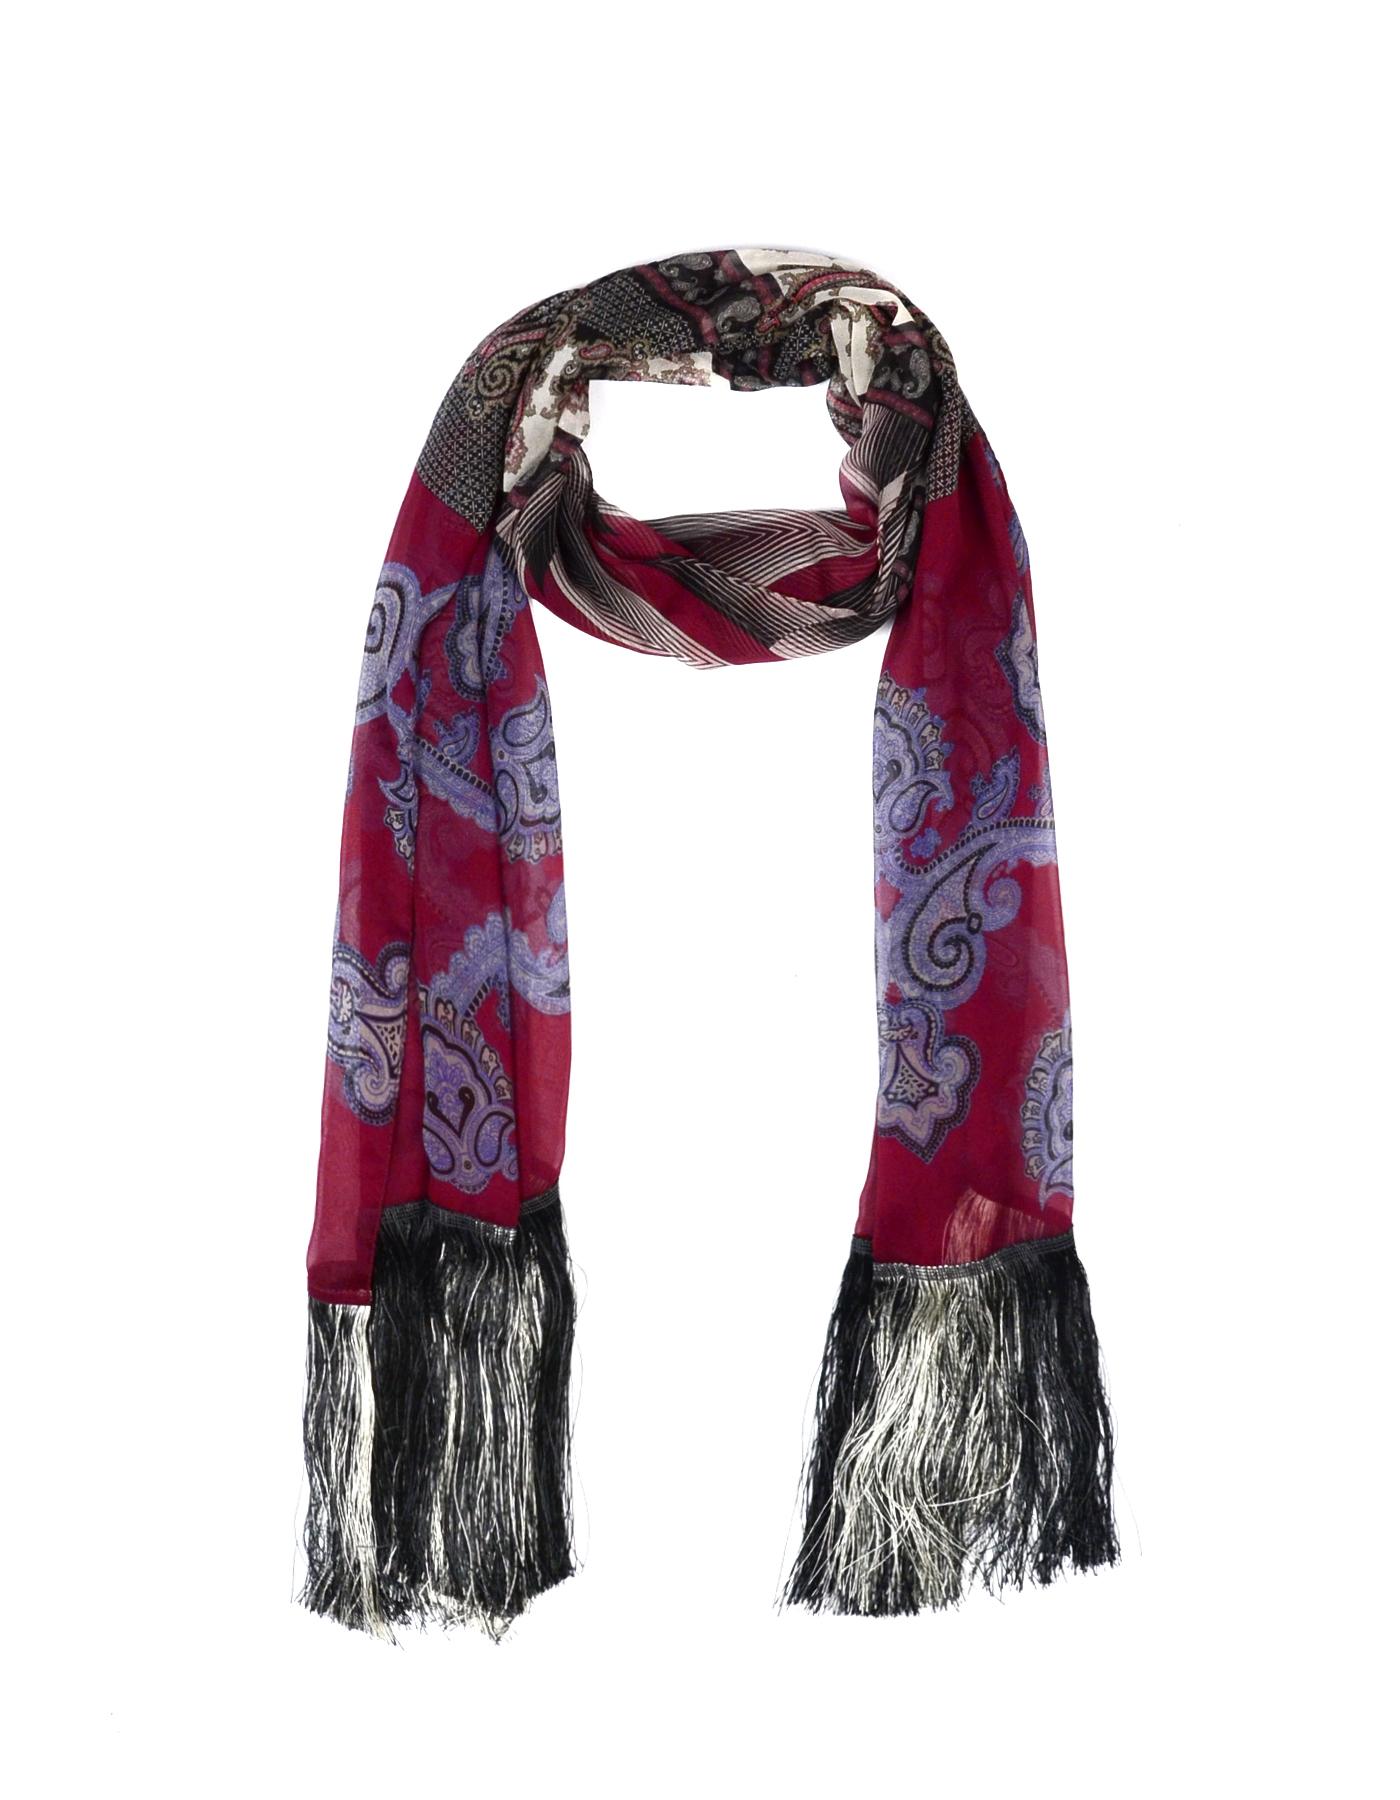 Etro Blue/Burgundy Silk Paisley Scarf W/ Fringe

Made In: Italy
Color: Blue/burgundy 
Materials: 100% silk, fringe- 100% acetate
Overall Condition: Excellent pre-owned condition 

Measurements: 
26